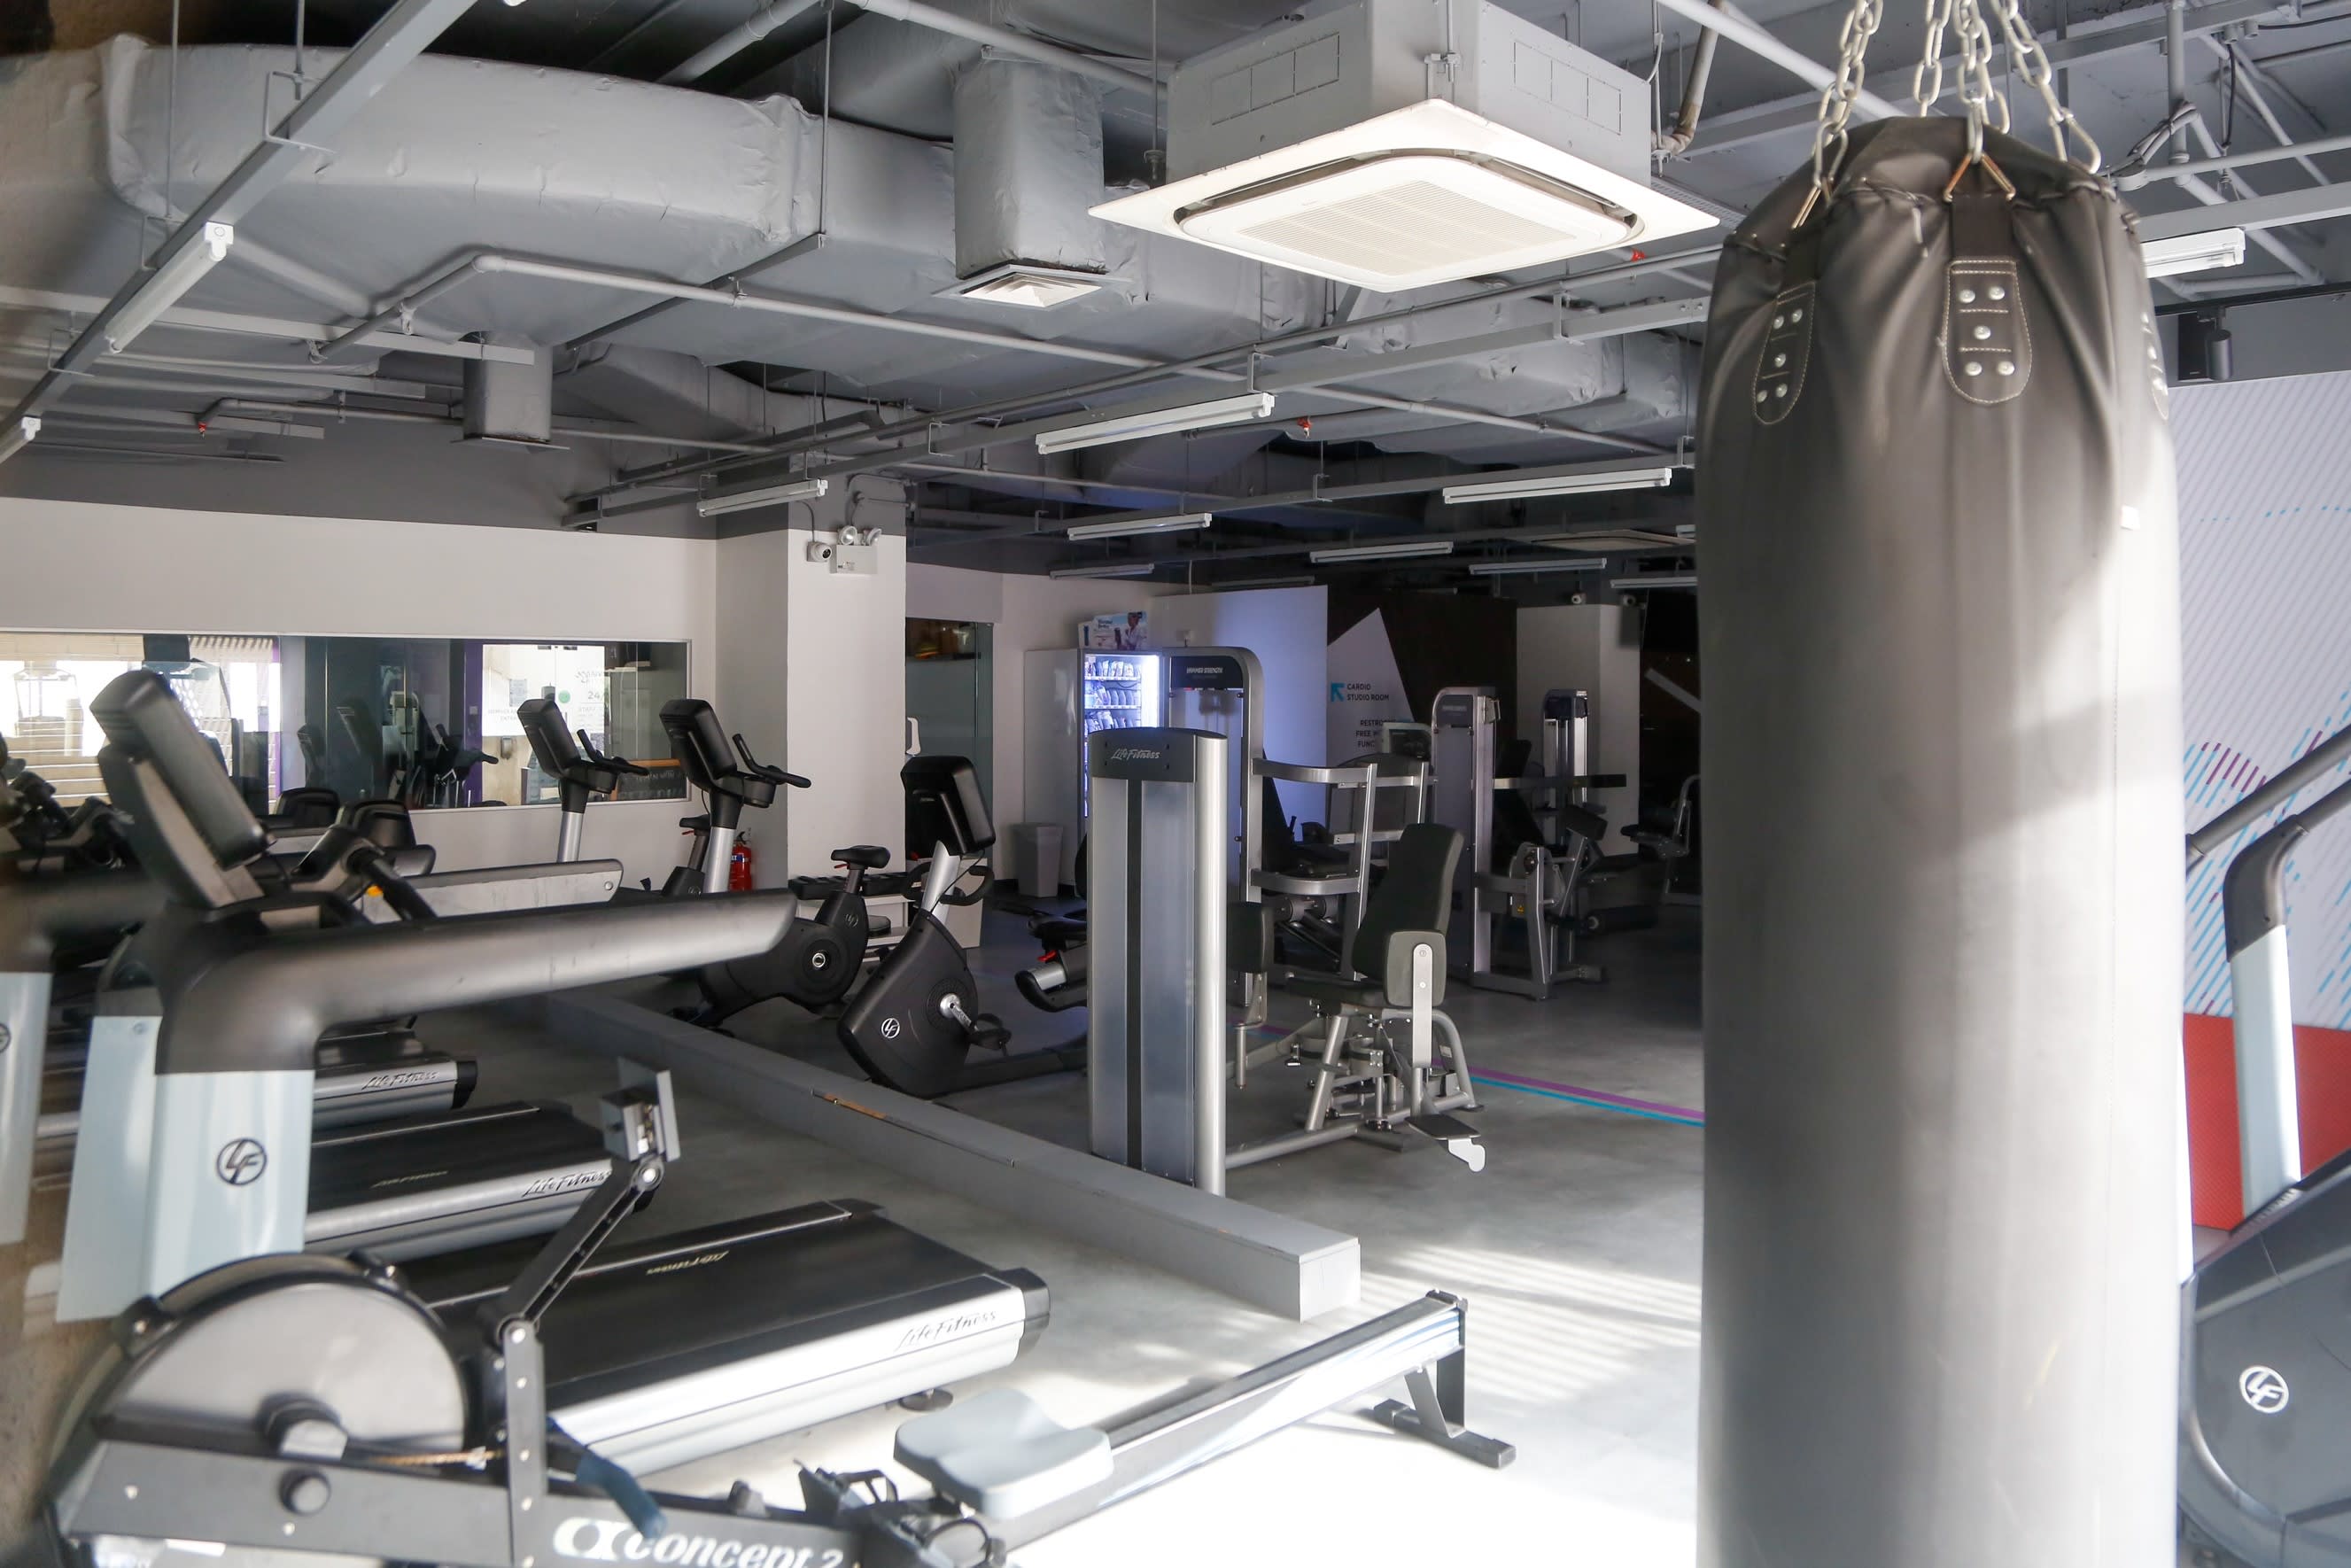 Step up enforcement of safe management measures in gyms to prevent more Covid-19 outbreaks